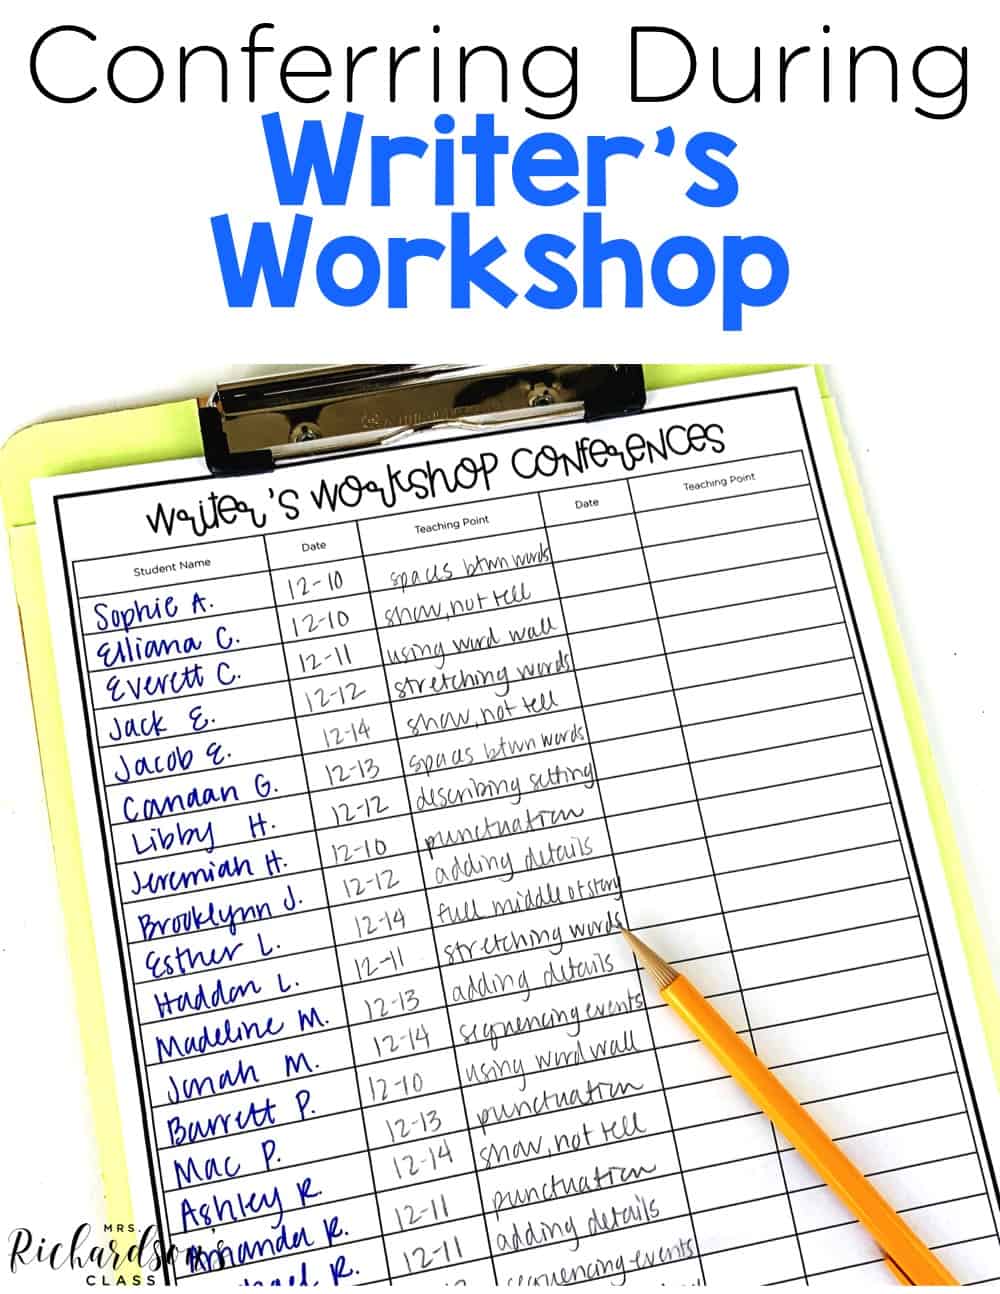 Conferring with students during writer's workshop is the heartbeat of that time. It's your time to listen, praise, and provide guidance! Grab the FREE writer's workshop conference sheet while you are there. 